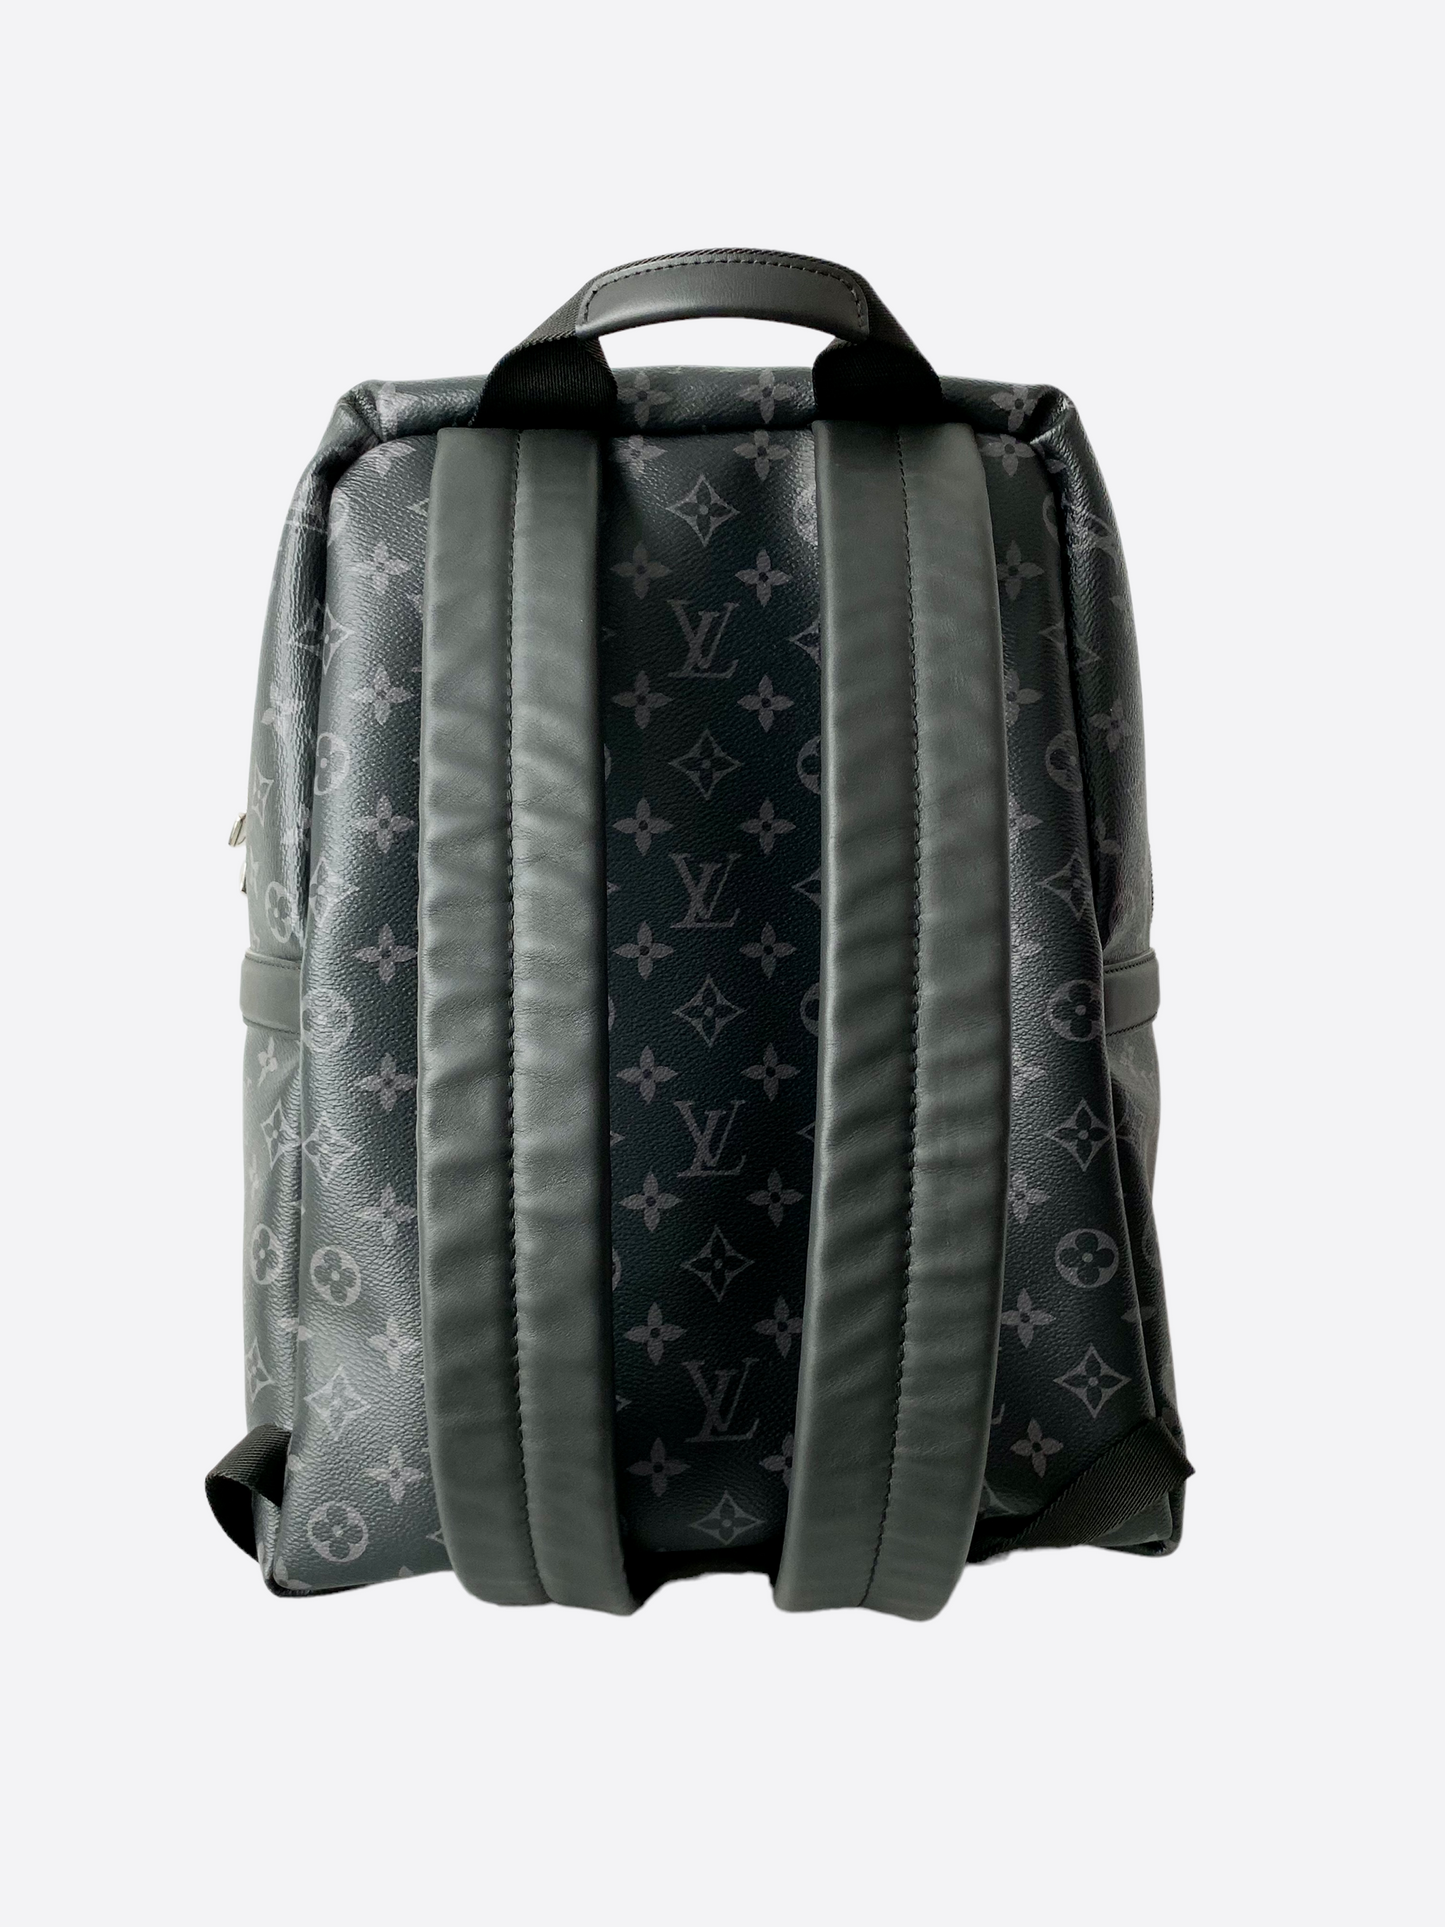 Louis Vuitton Monogram Eclipse Discovery Backpack – Savonches